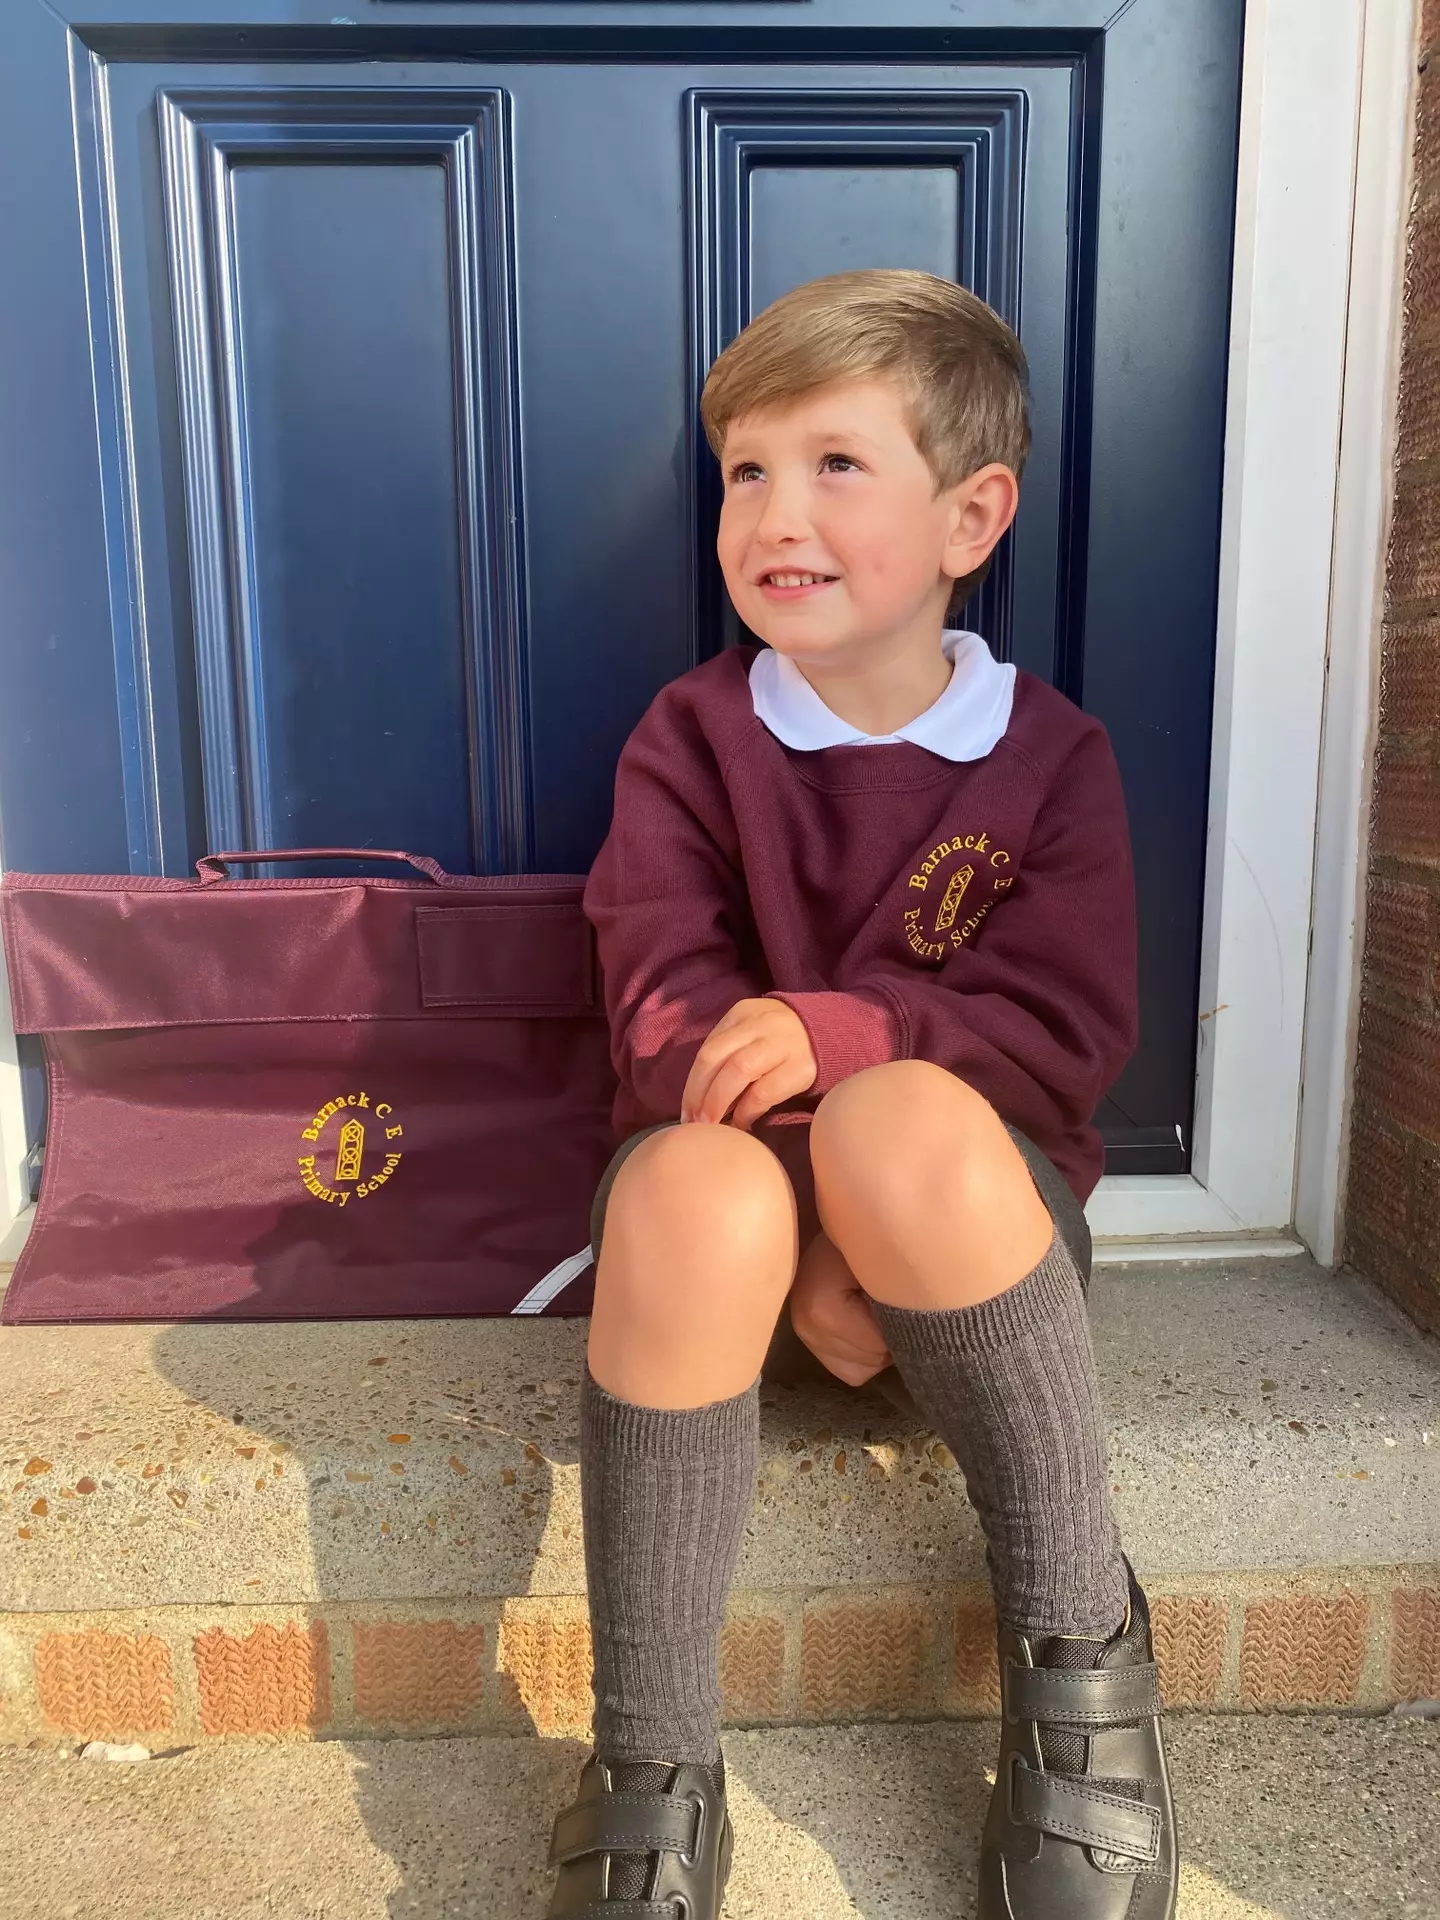 The Benedict Blythe Foundation – set up in memory of Benedict – along with The Allergy Team and the Independent Schools’ Bursars Association (ISBA) launched the Schools Allergy Code.